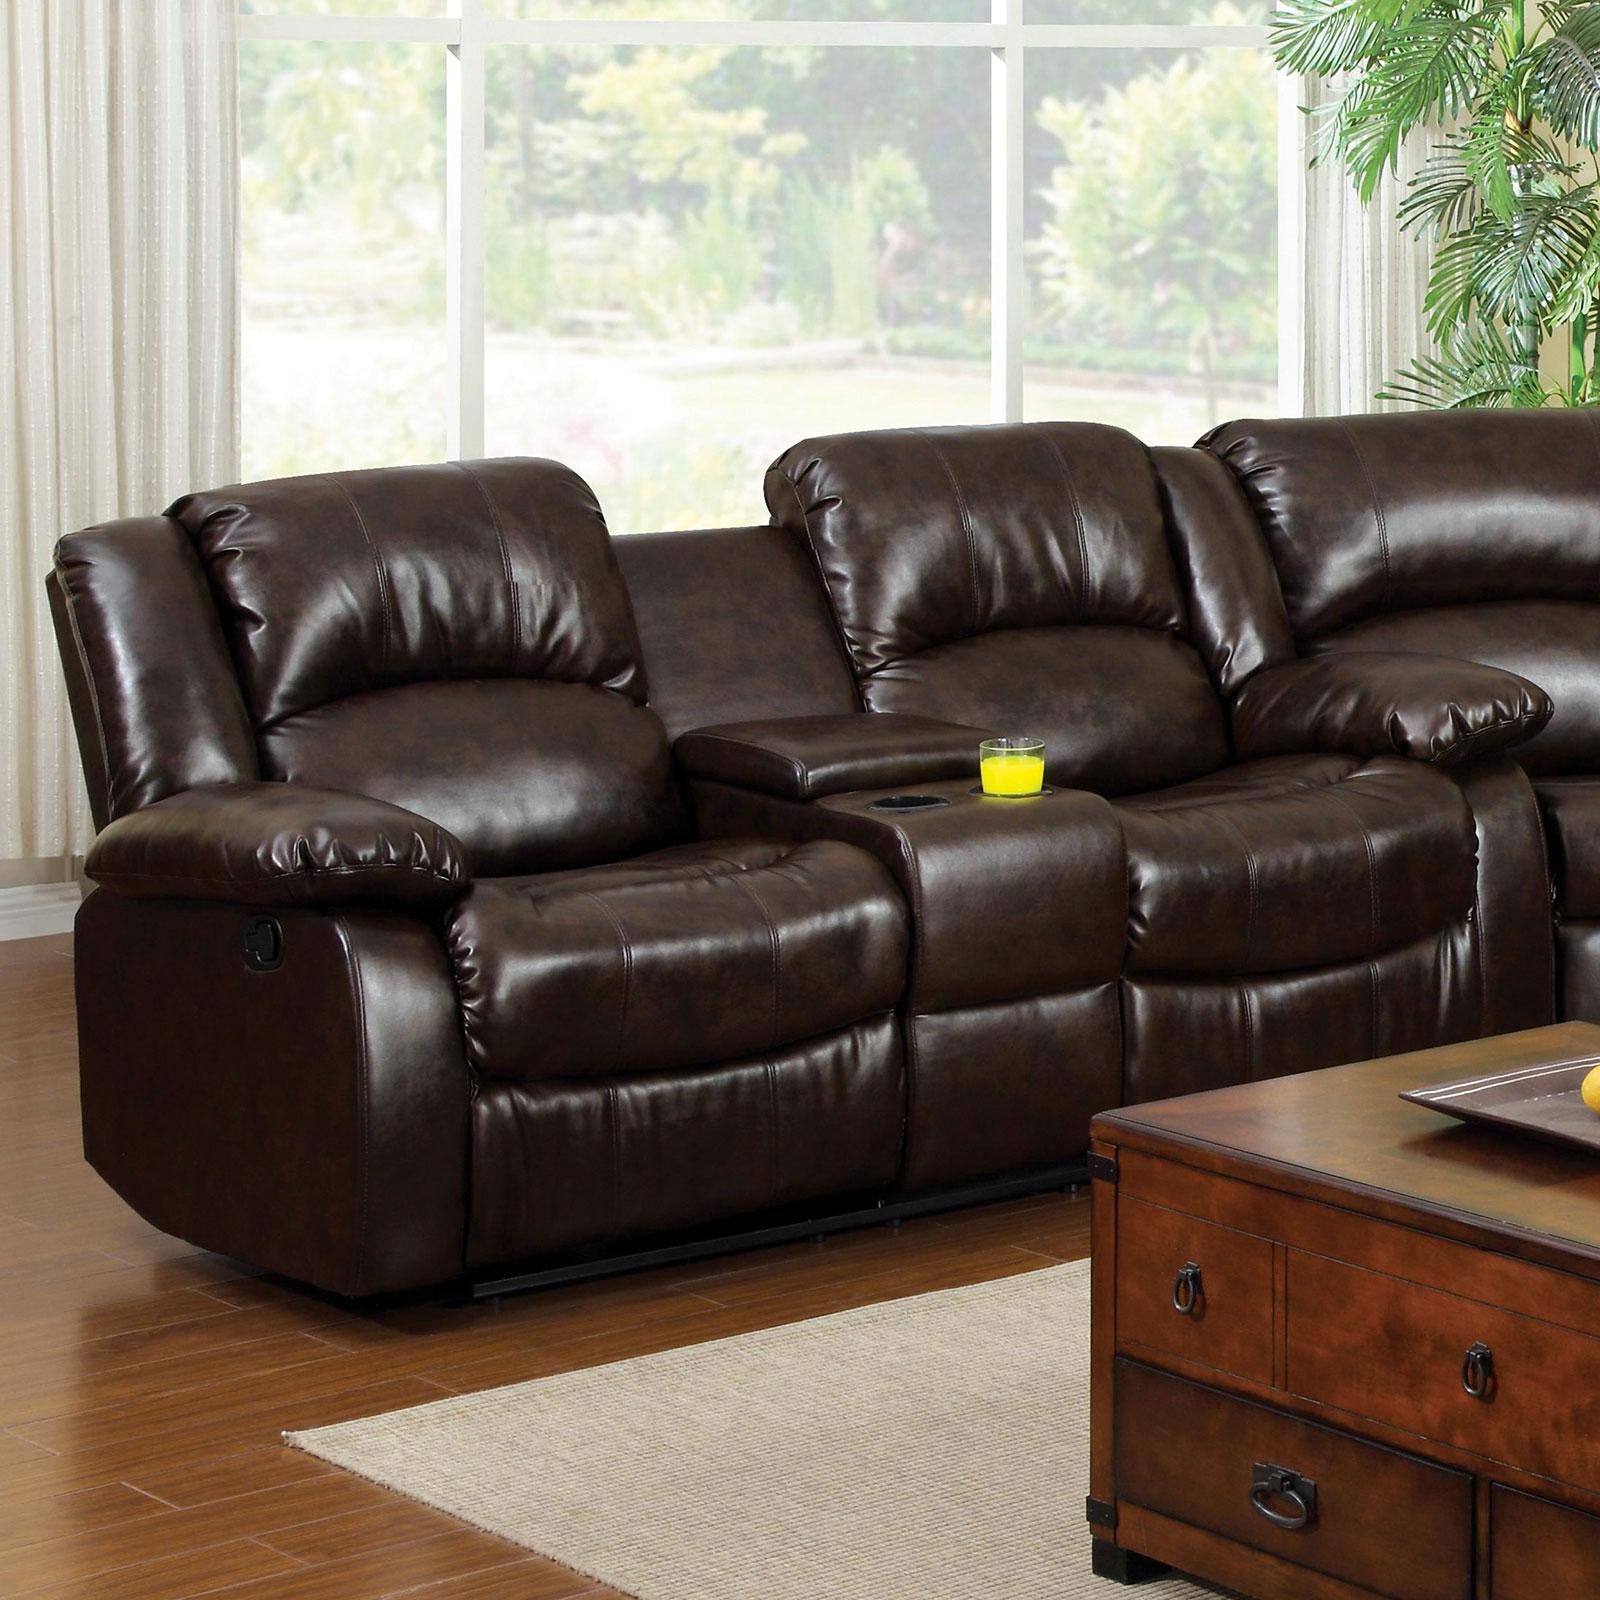 Transitional Reclining Loveseat WINSLOW CM6556L-CT CM6556L-CT in Brown Bonded Leather